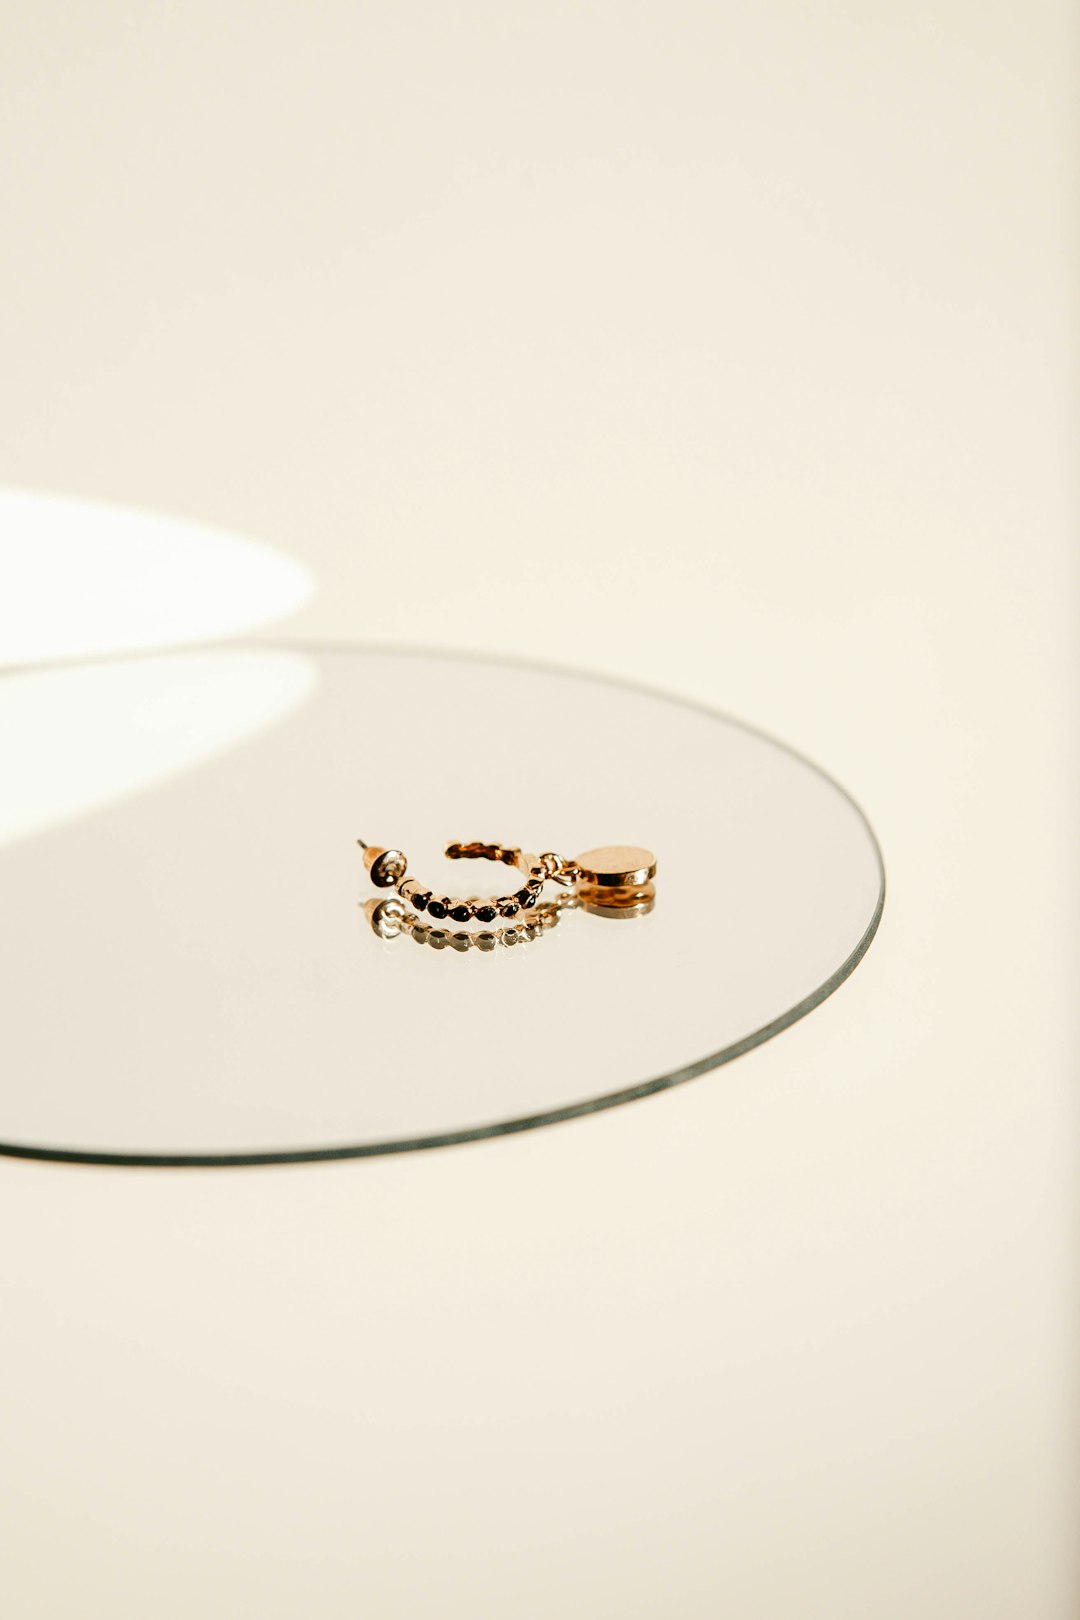 gold and diamond ring on white surface